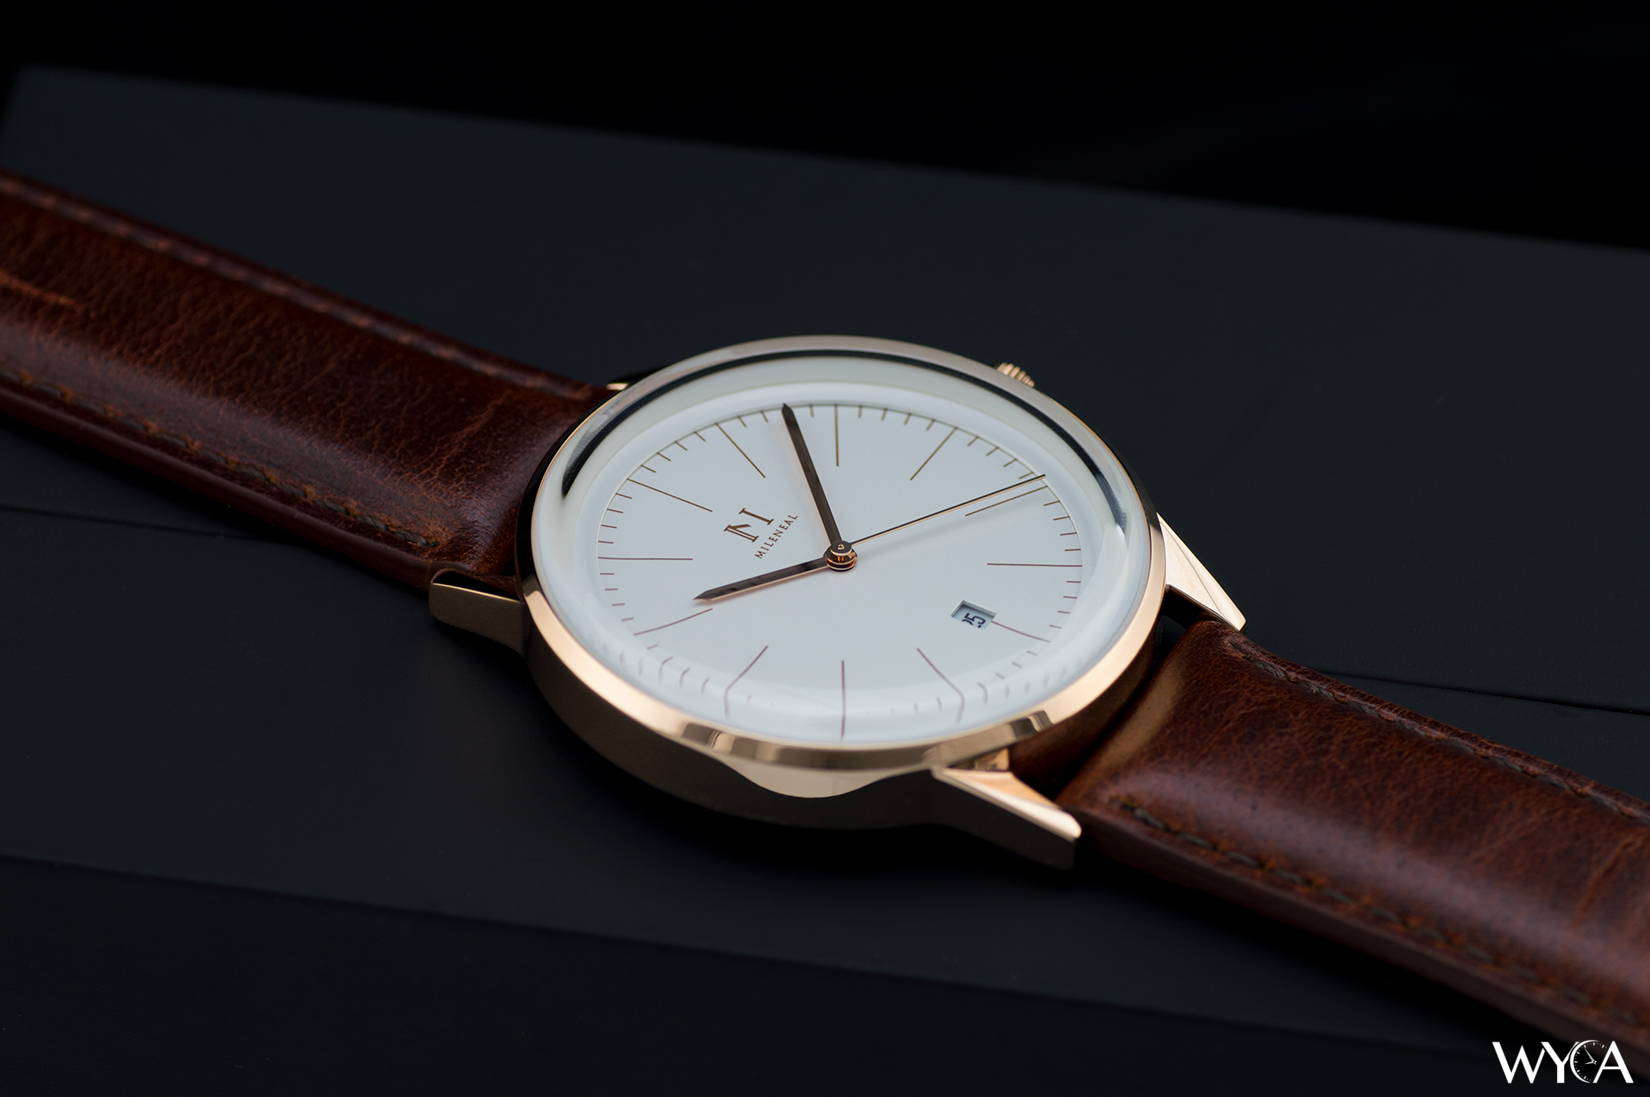 Mileneal Classic Watch Review